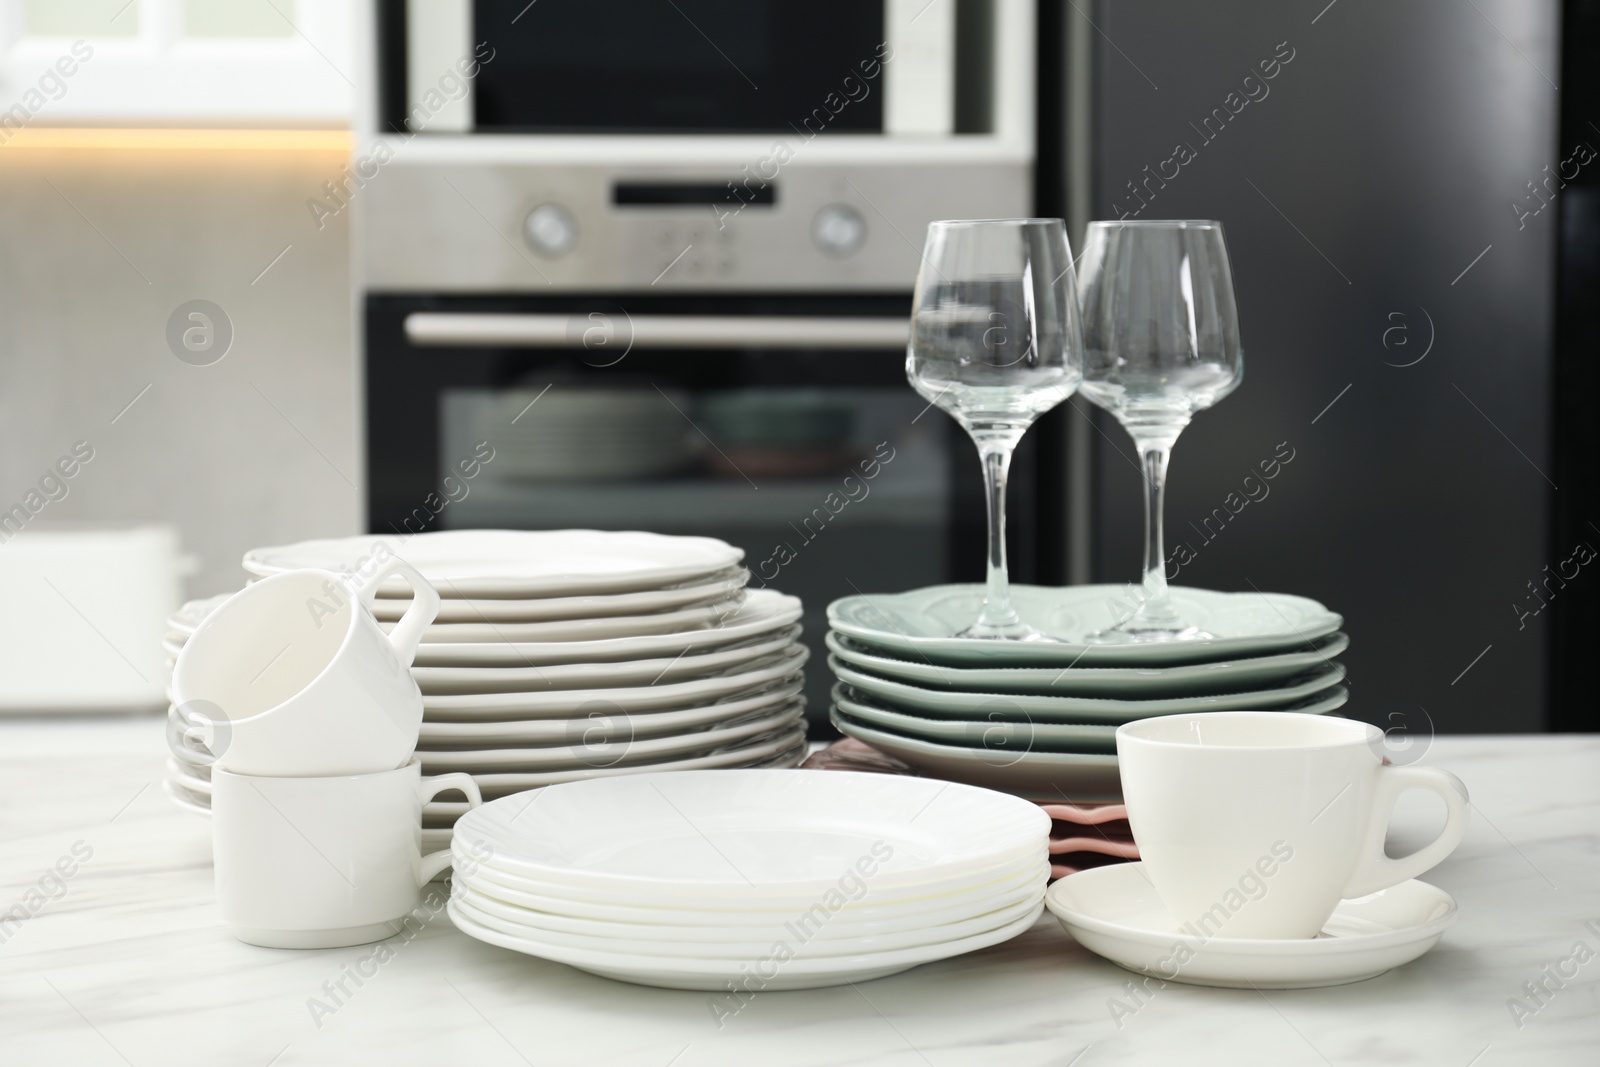 Photo of Clean plates, cups and glasses on white marble table in kitchen